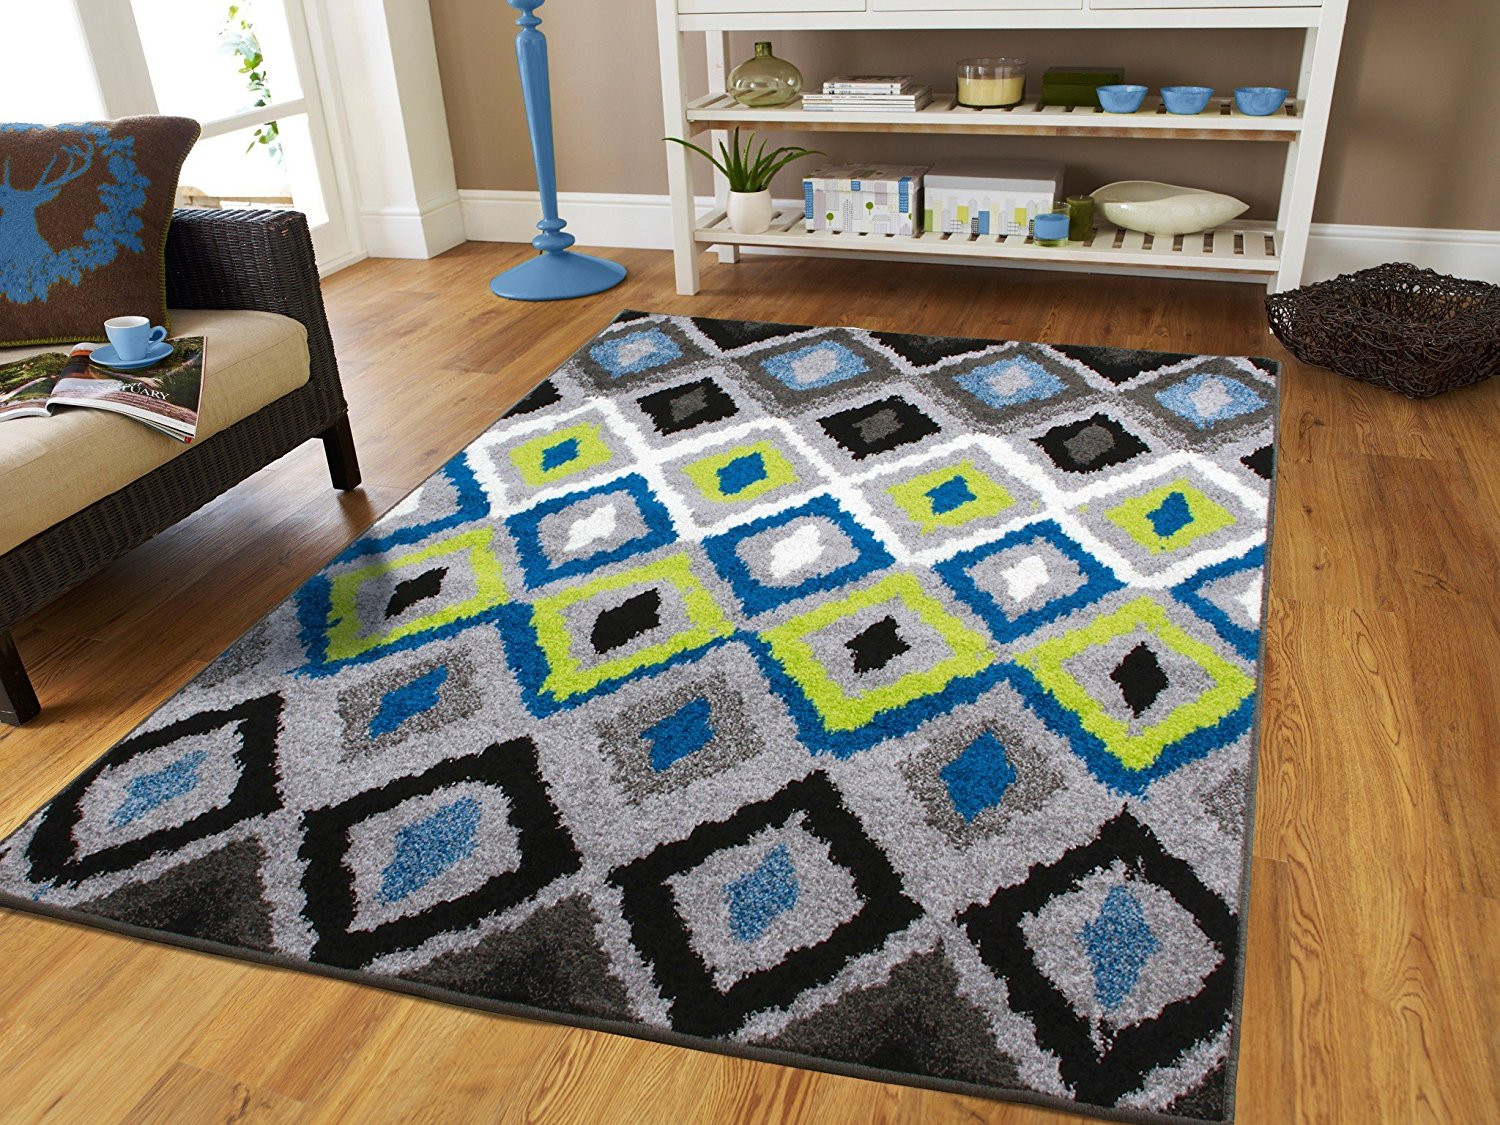 Walmart Living Room Rugs
 Ctemporary Area Rugs 5x7 Area Rugs5 by 7 Rug for Living